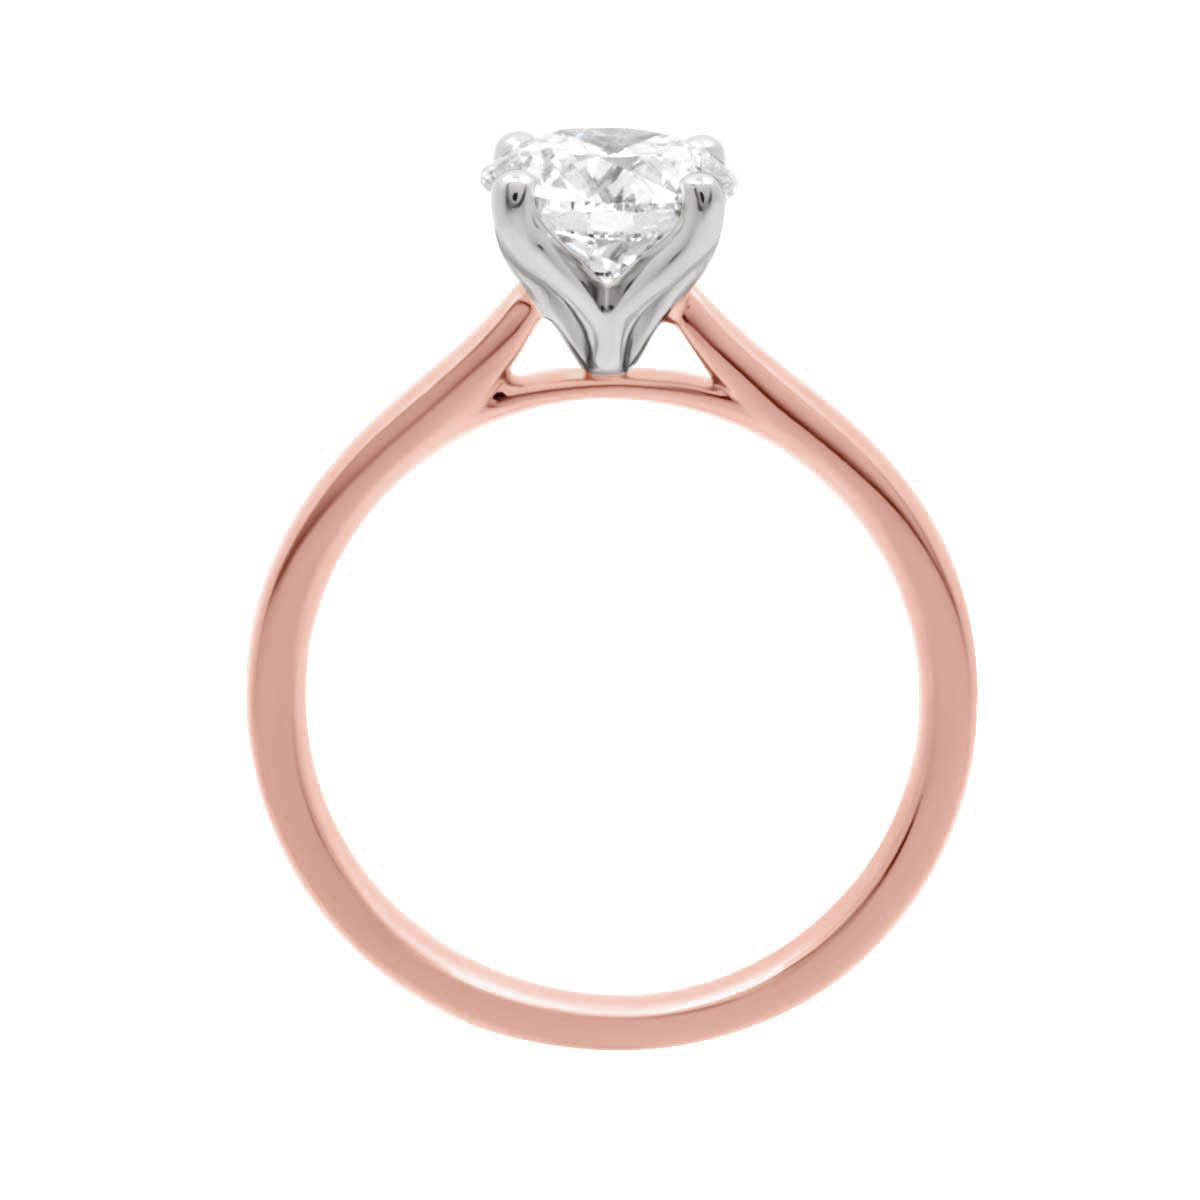 Tulip Setting Oval Solitaire in rose gold with a white gold head